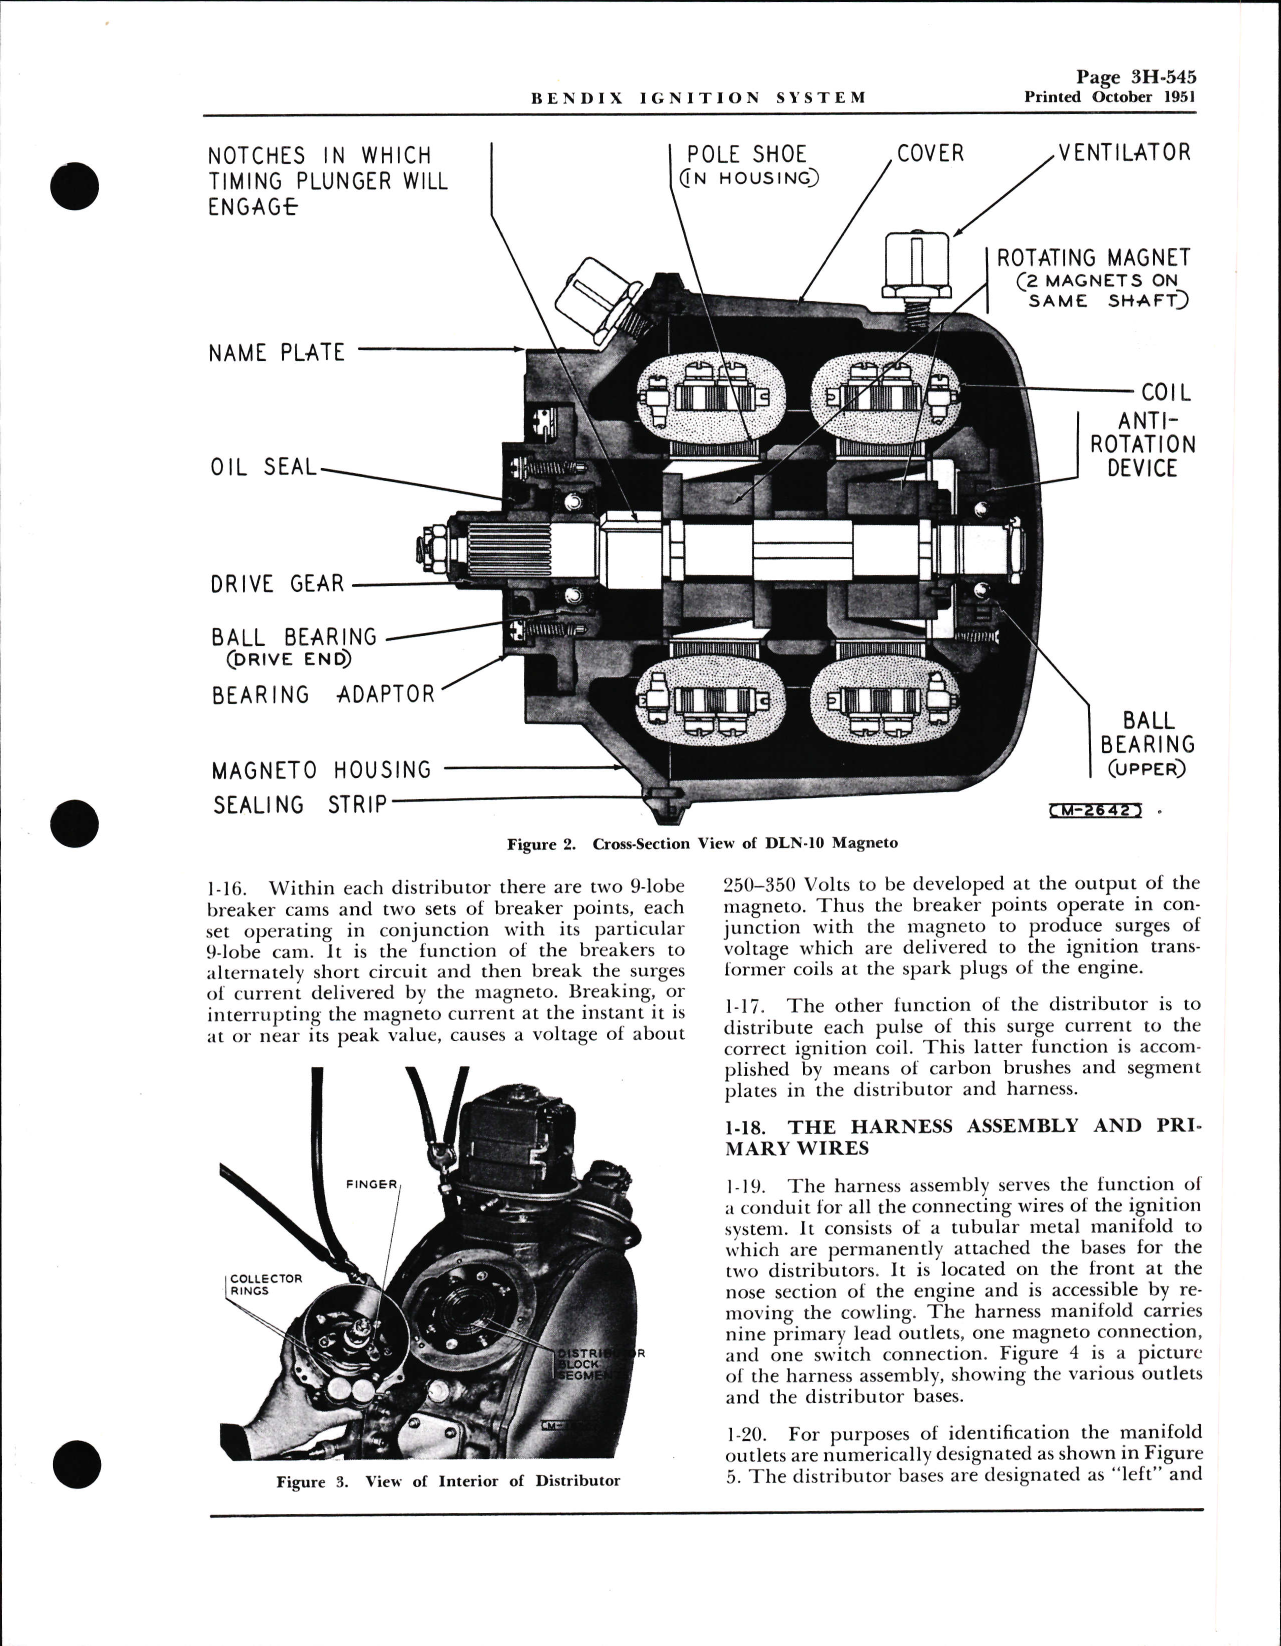 Sample page 5 from AirCorps Library document: Installation, Service, & Maintenance Instructions for Bendix Low Tension - High Altitude Ignition